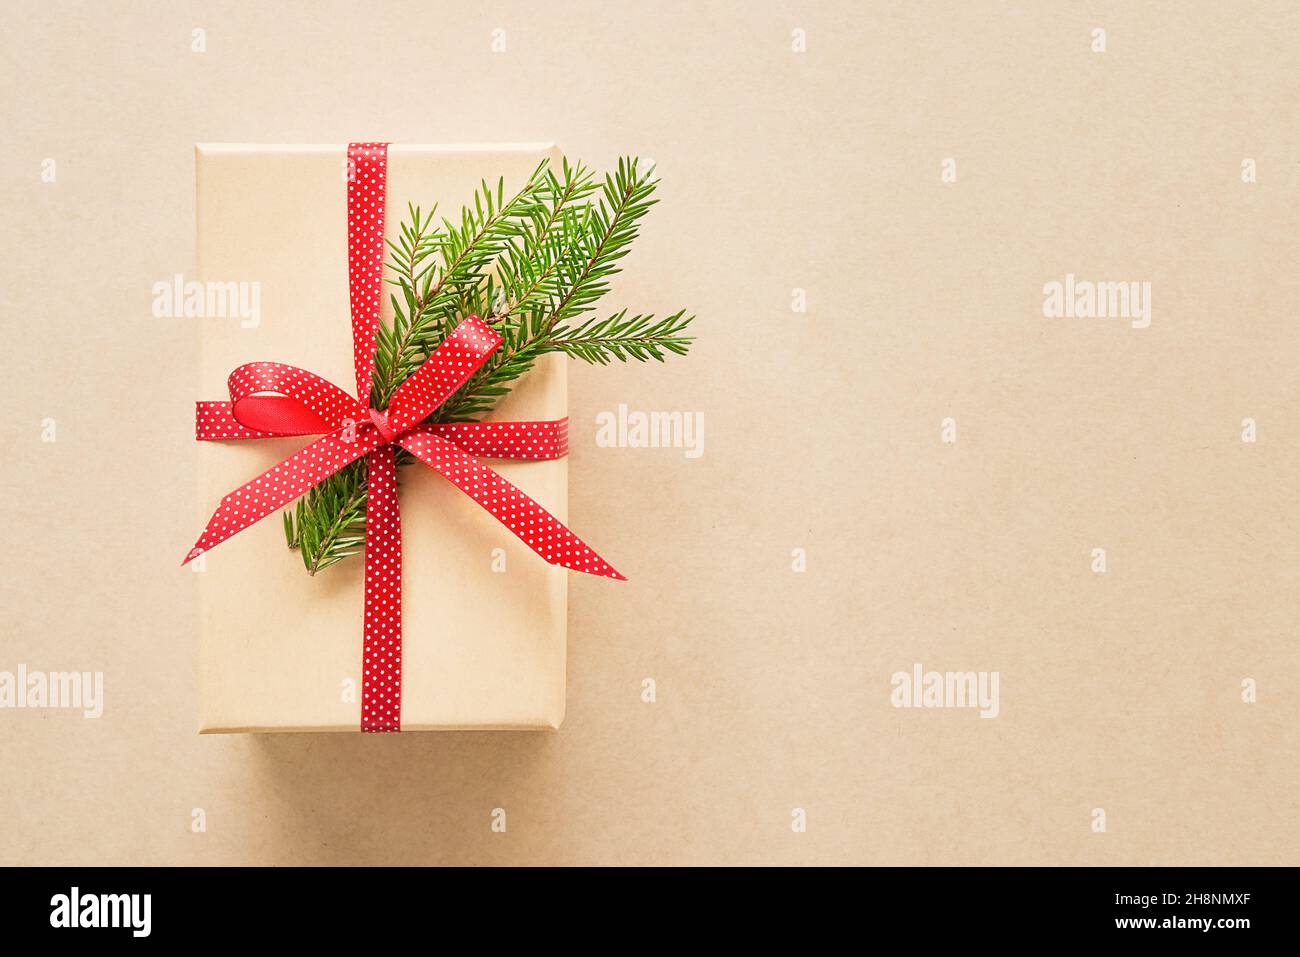 Christmas gift box decorated with red ribbon and fir tree branch on a kraft paper background. Top view, copy space for text Stock Photo